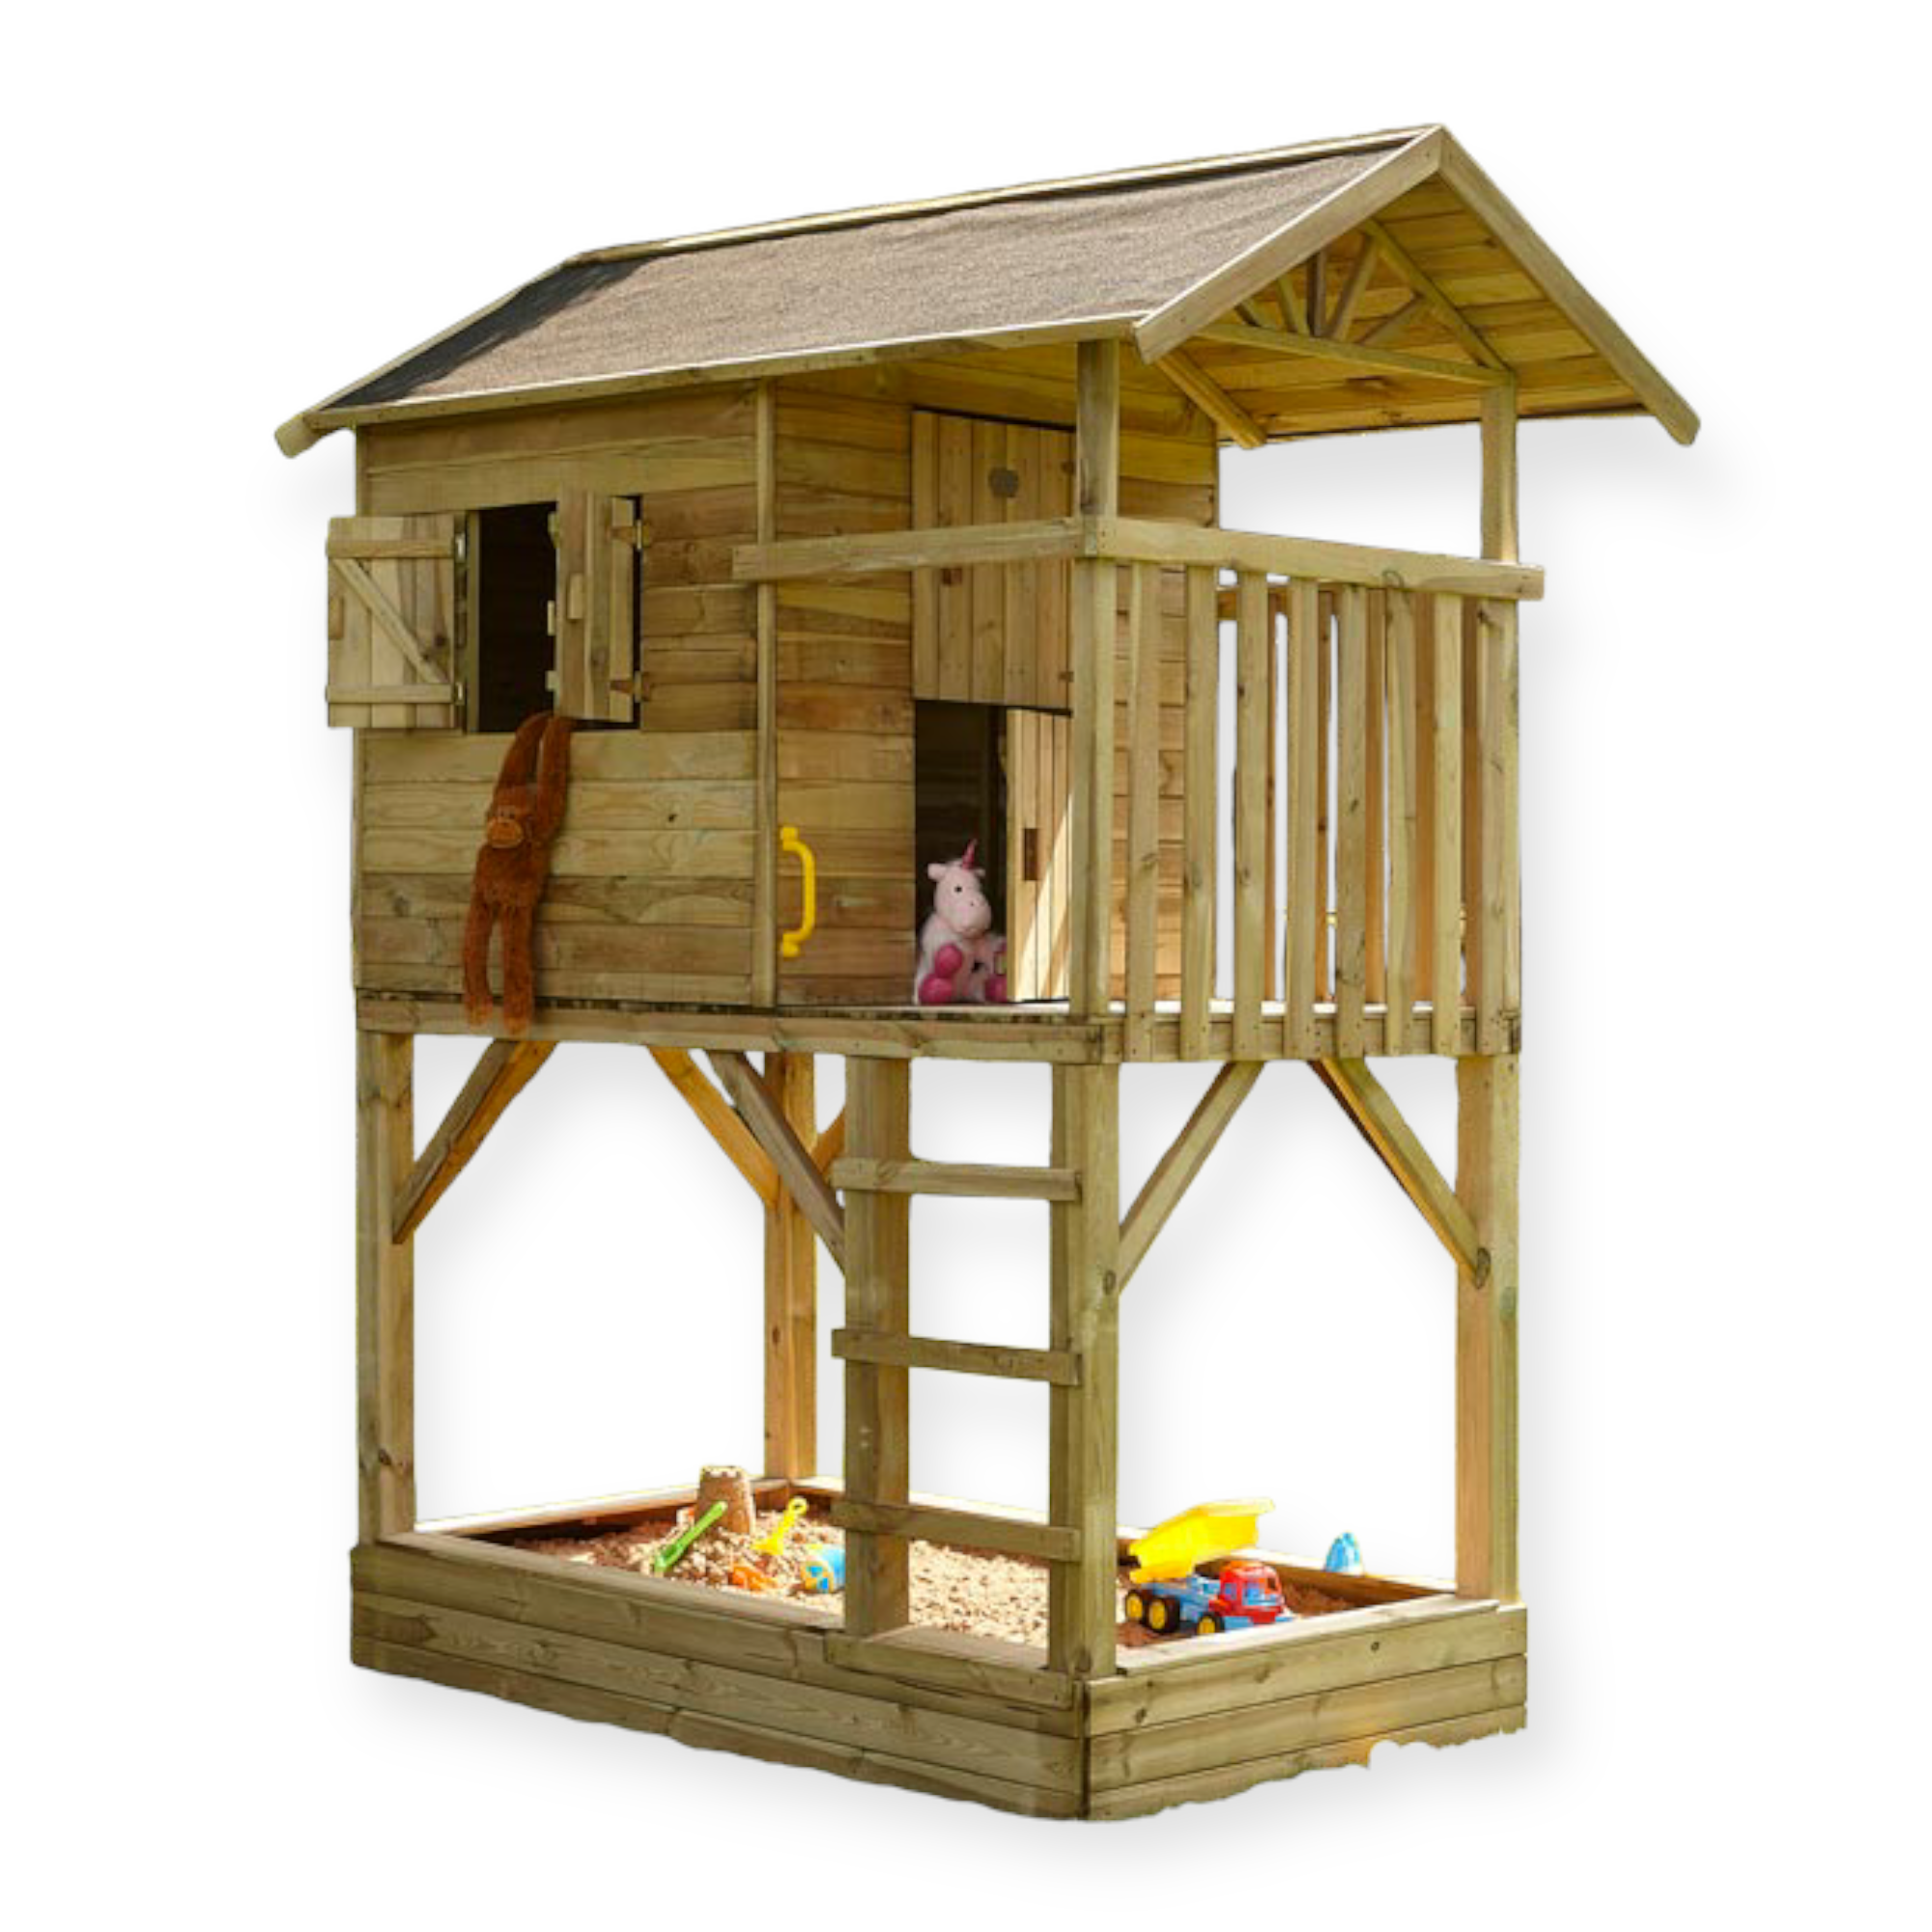 Featured image for “RGP | Beach Hut Playhouse 8x5”